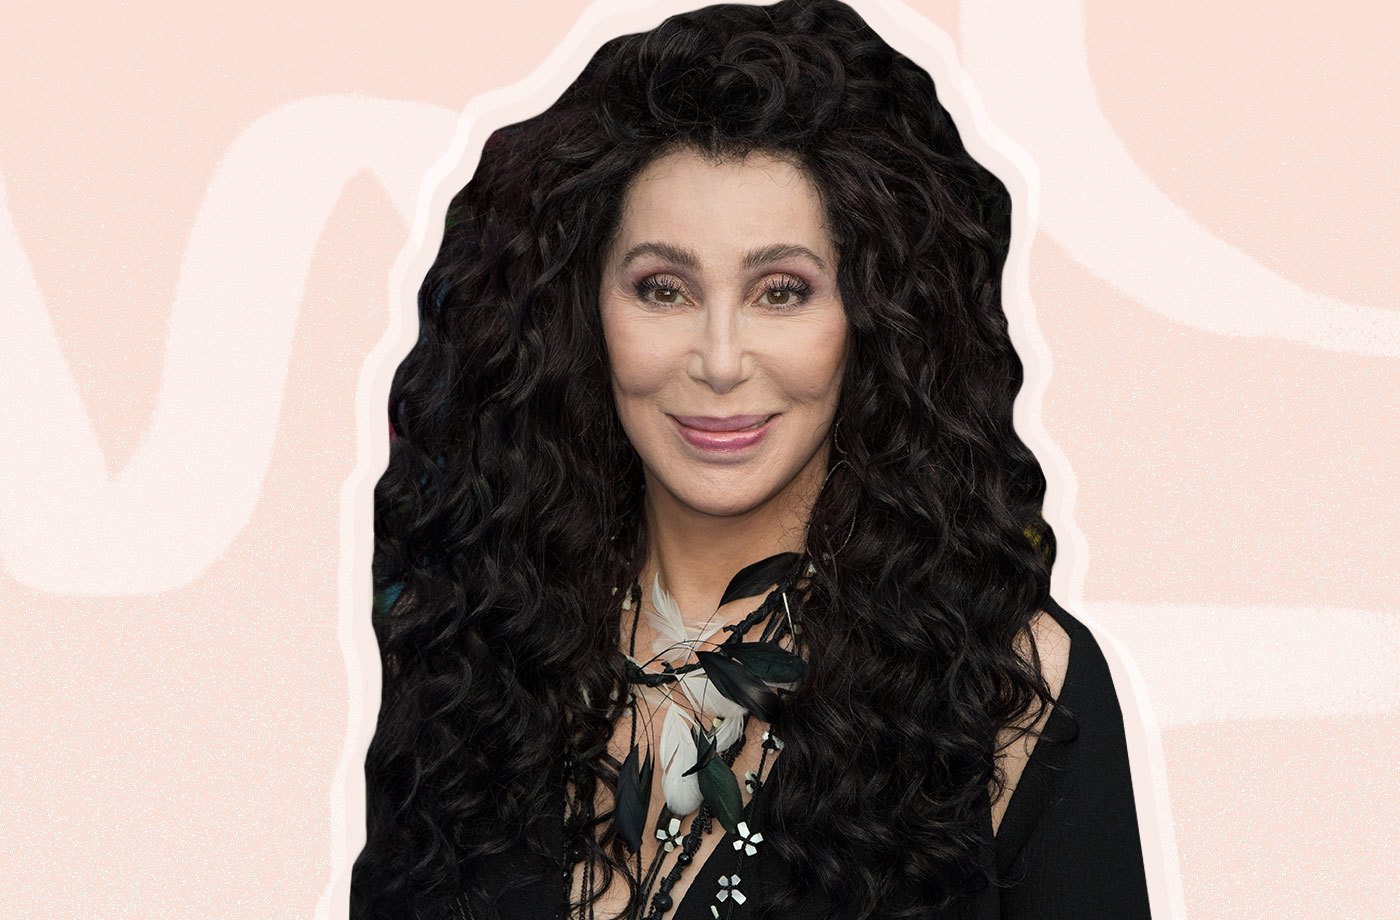 For a Cher birthday celebration, let Big Cher Energy fuel you